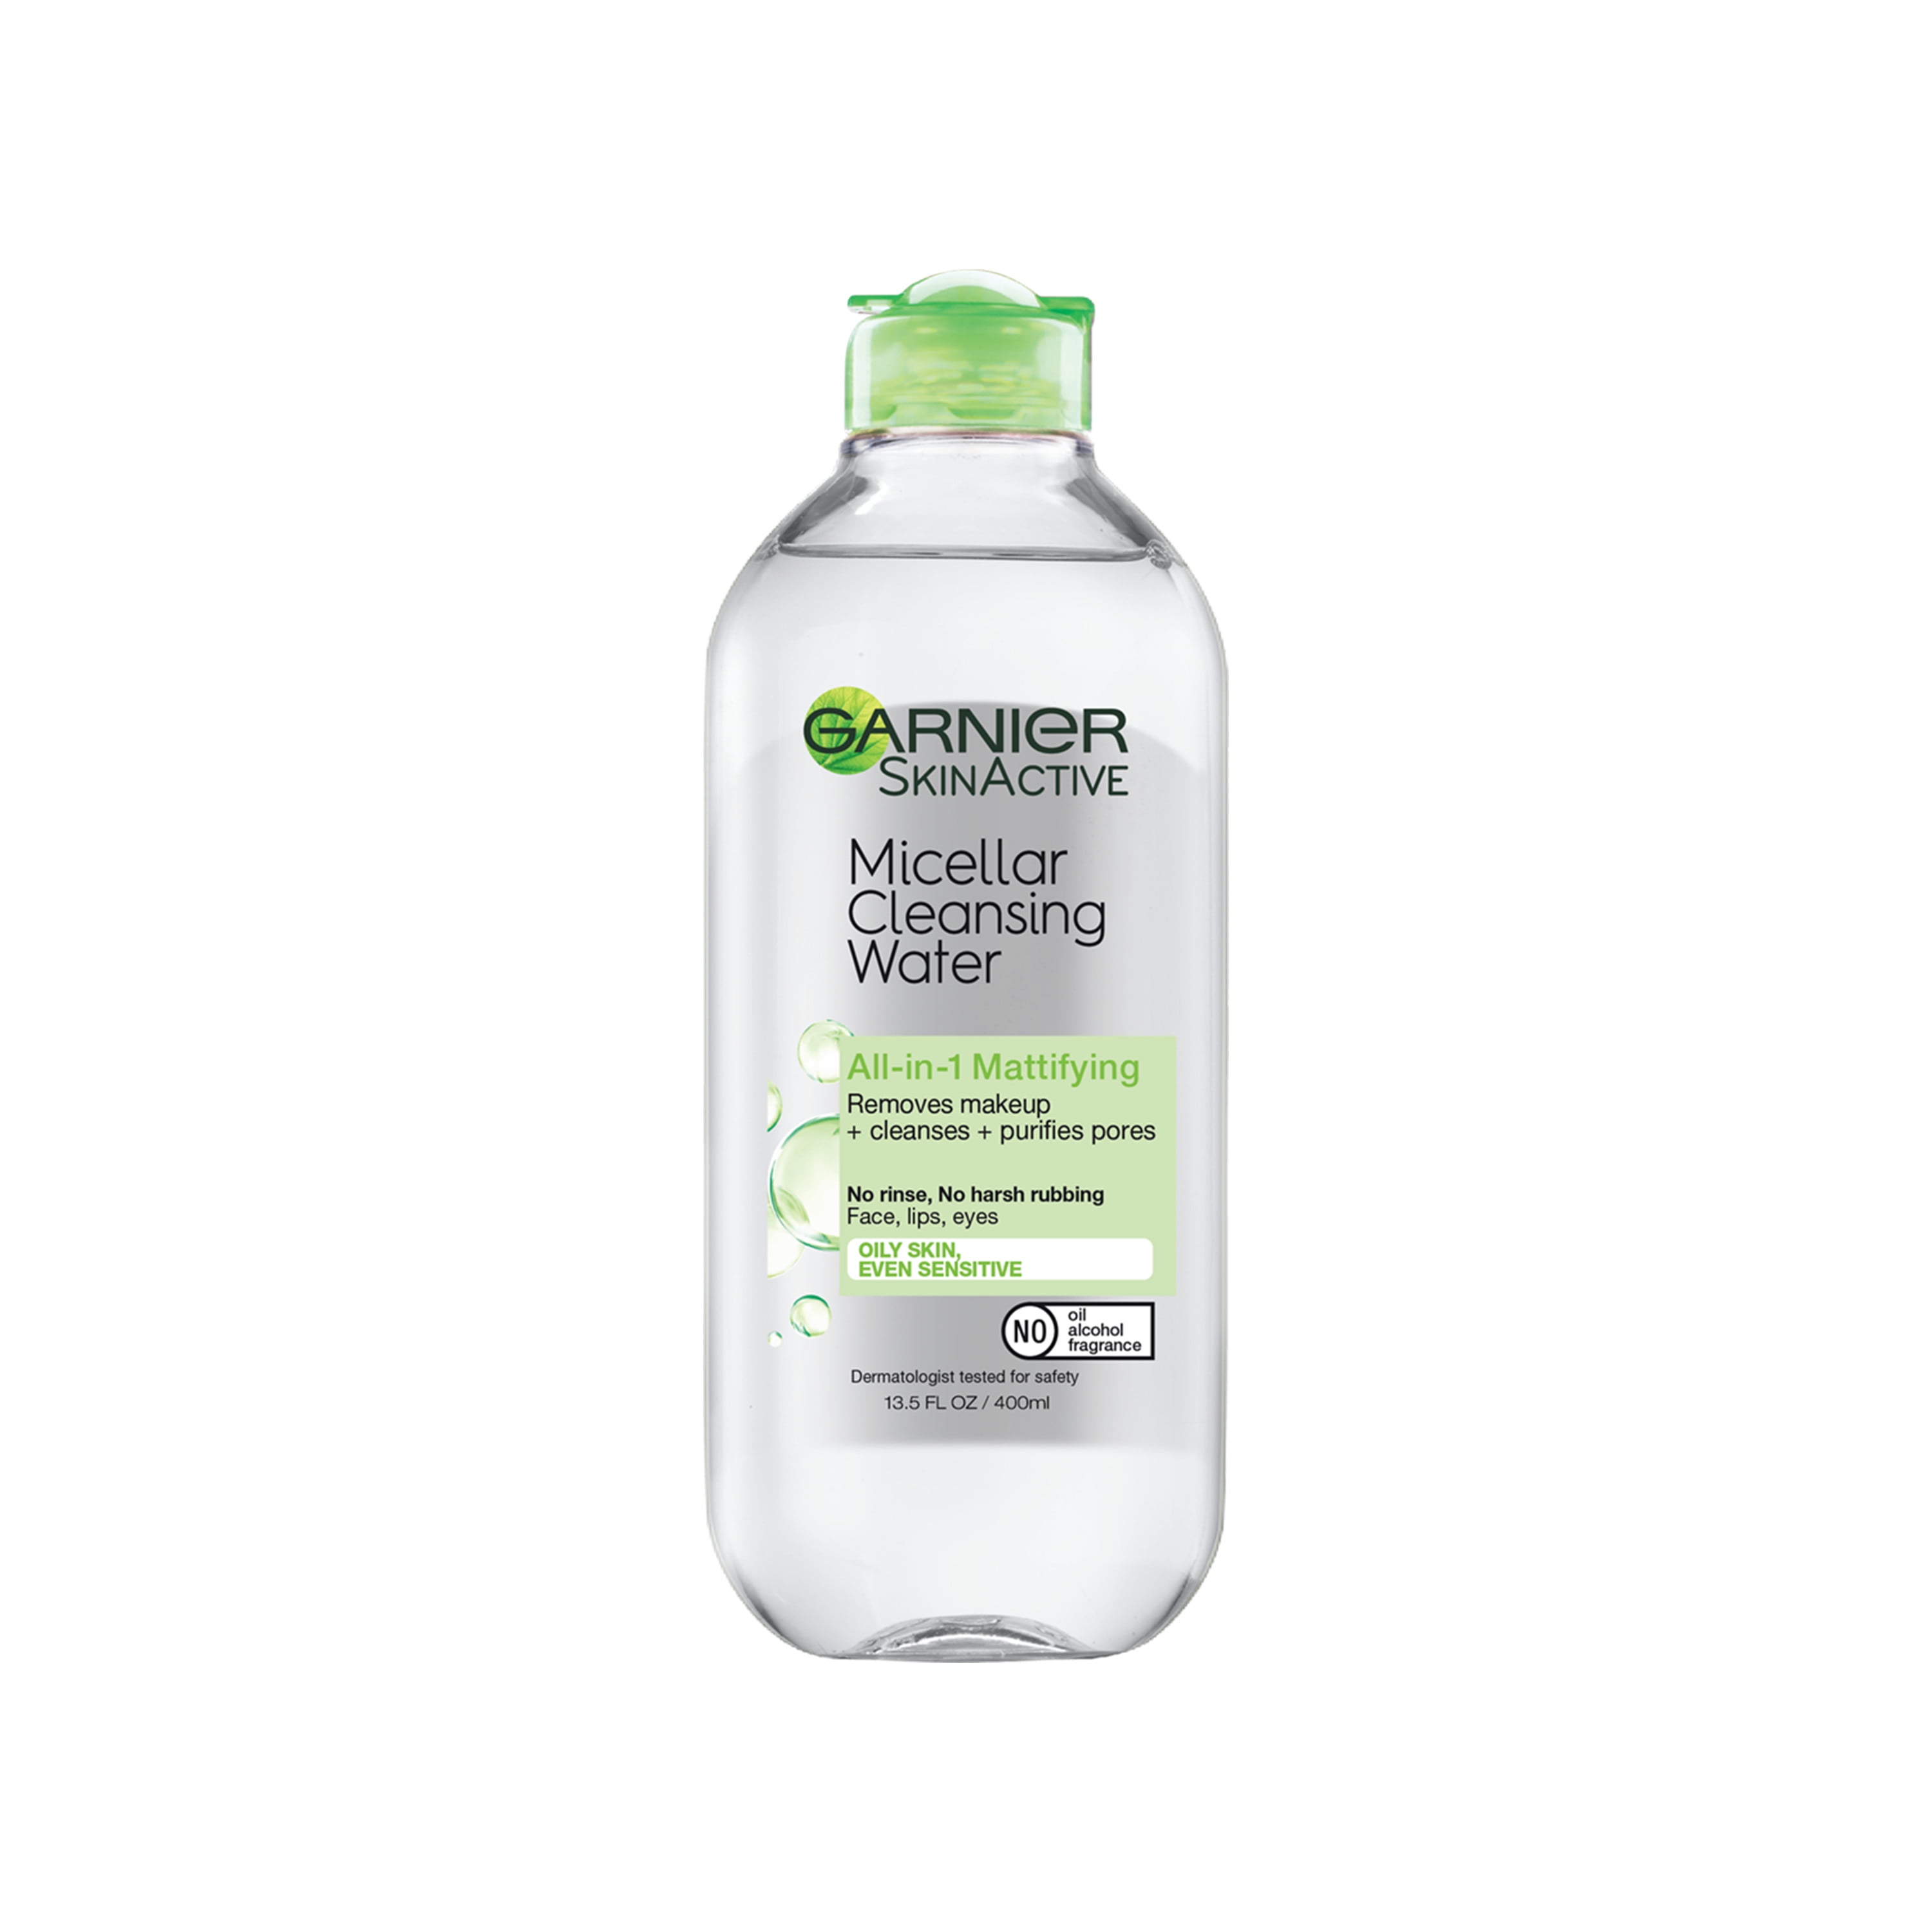 Garnier SkinActive Micellar Cleansing Water and Makeup Remover for Oily Skin, 13.5 fl oz